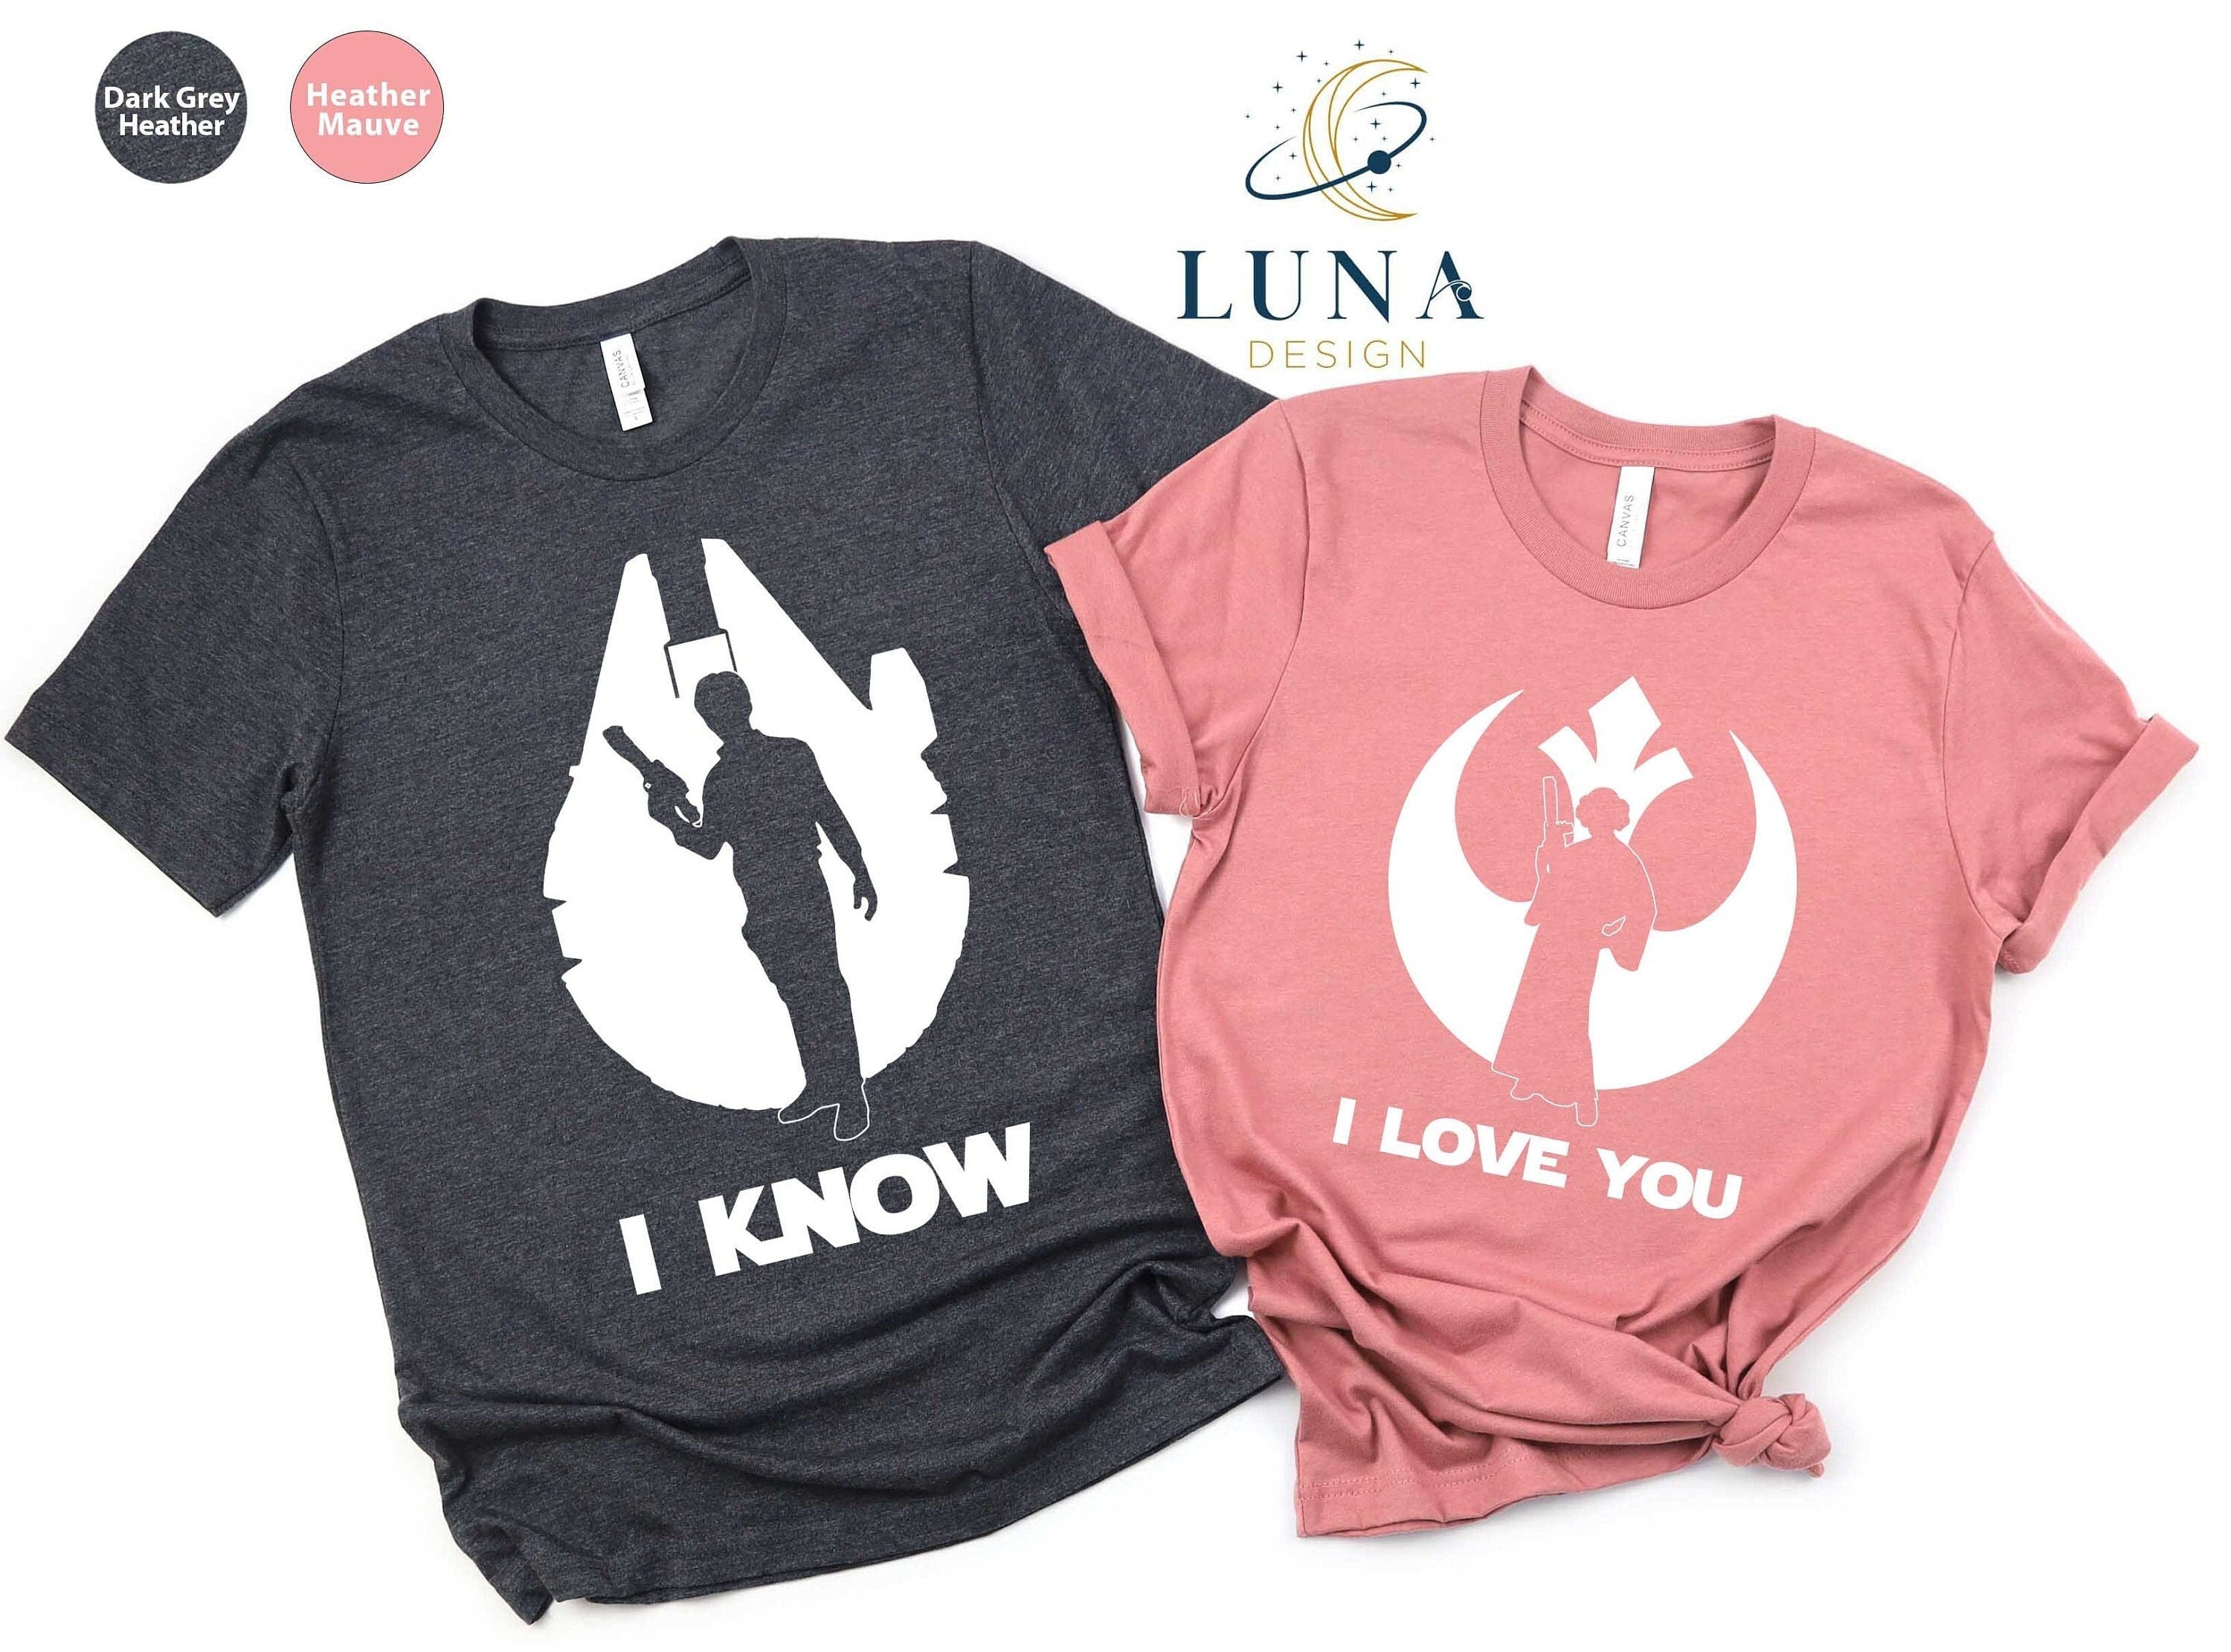 Disney Trip Must-Have: 'I Love You And I Know' Star Wars Love Shirt